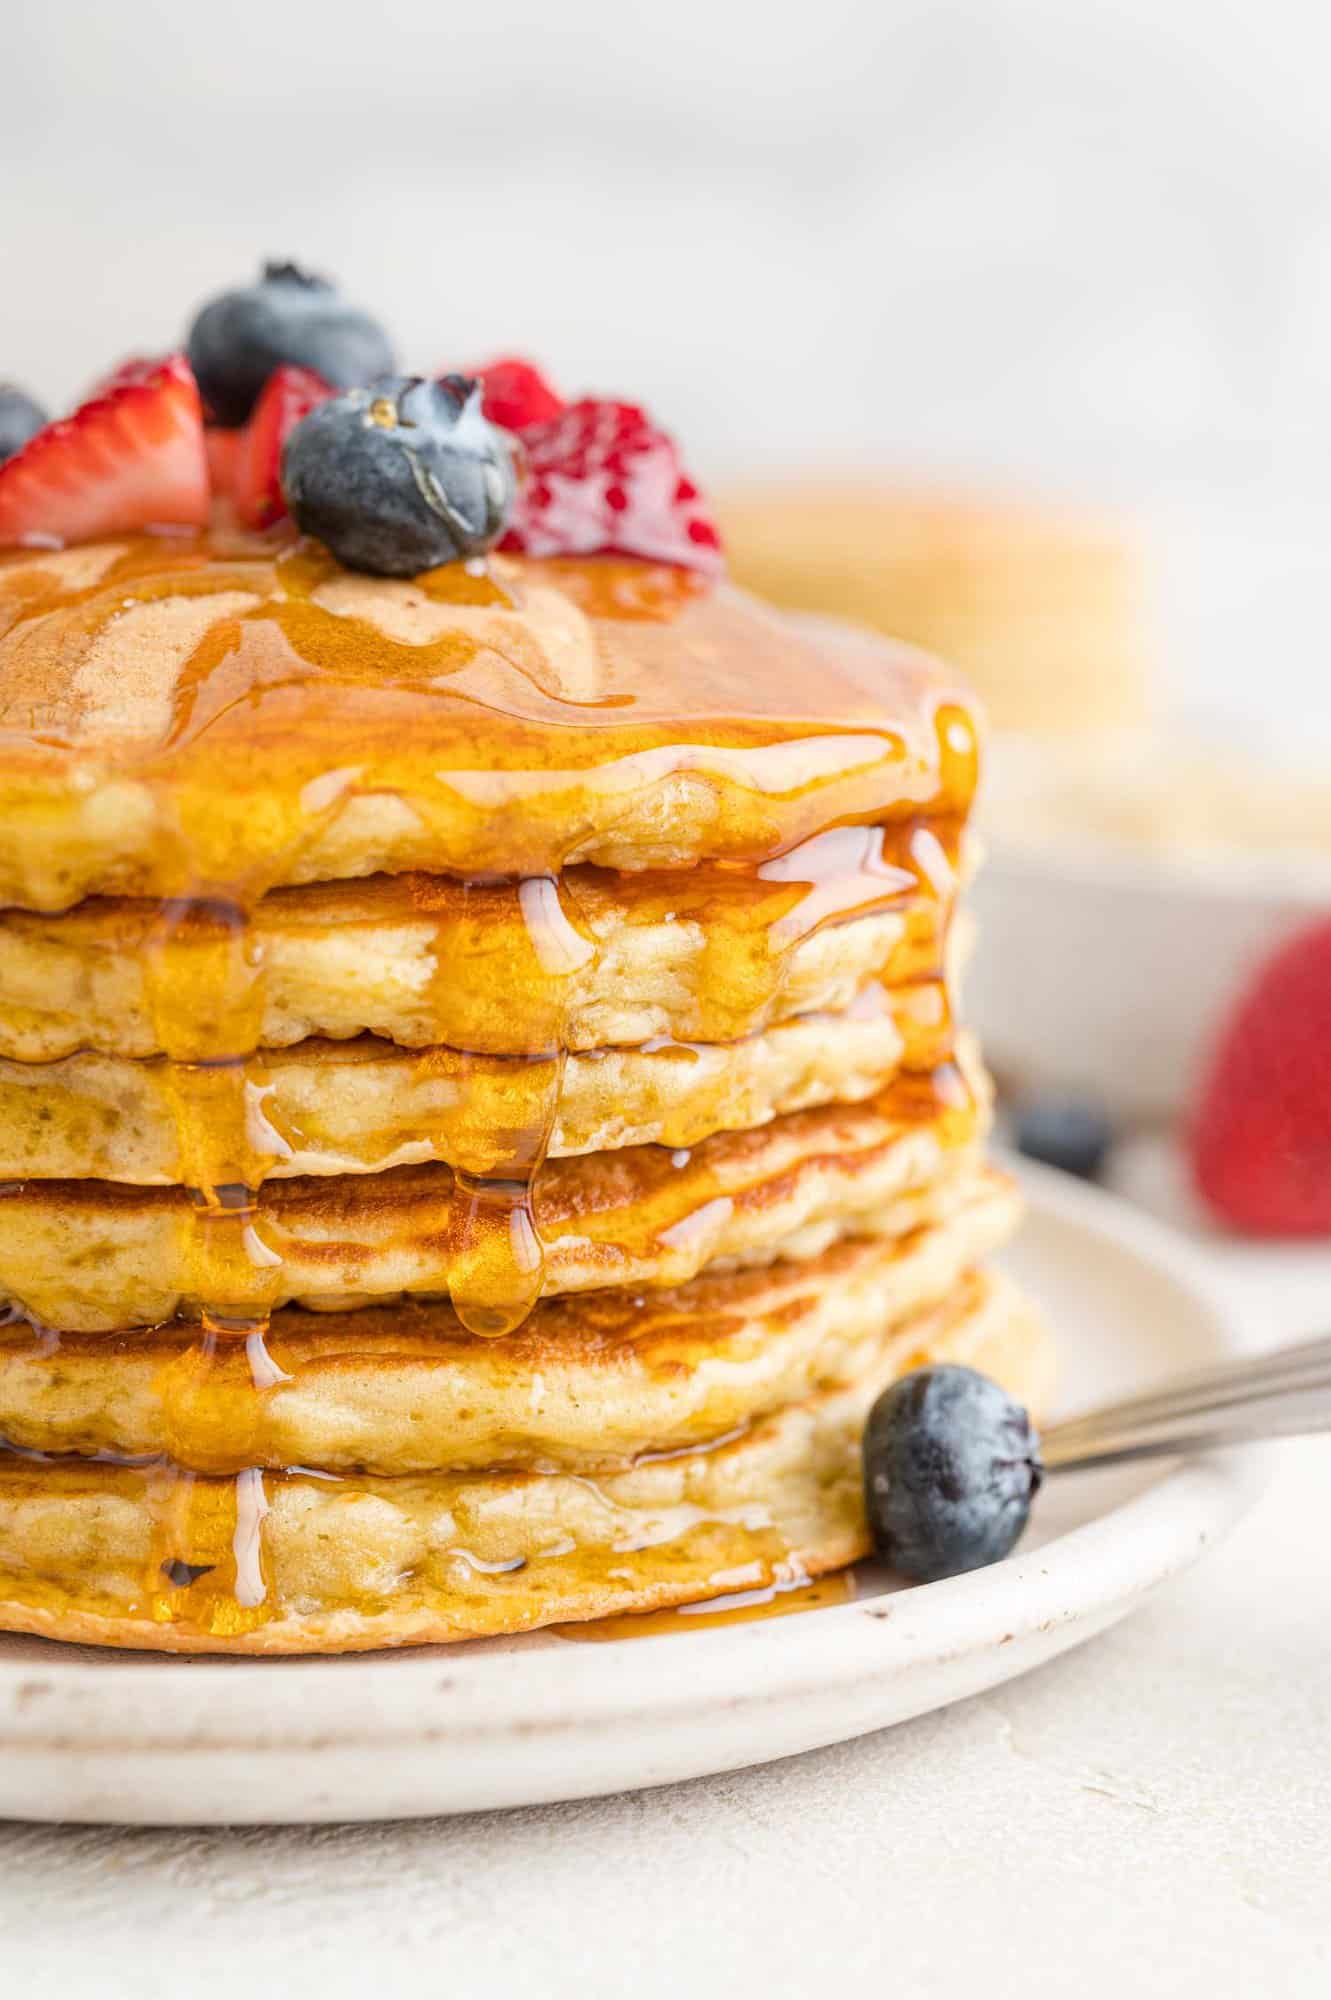 Quinoa pancakes in a stack with berries and maple syrup.